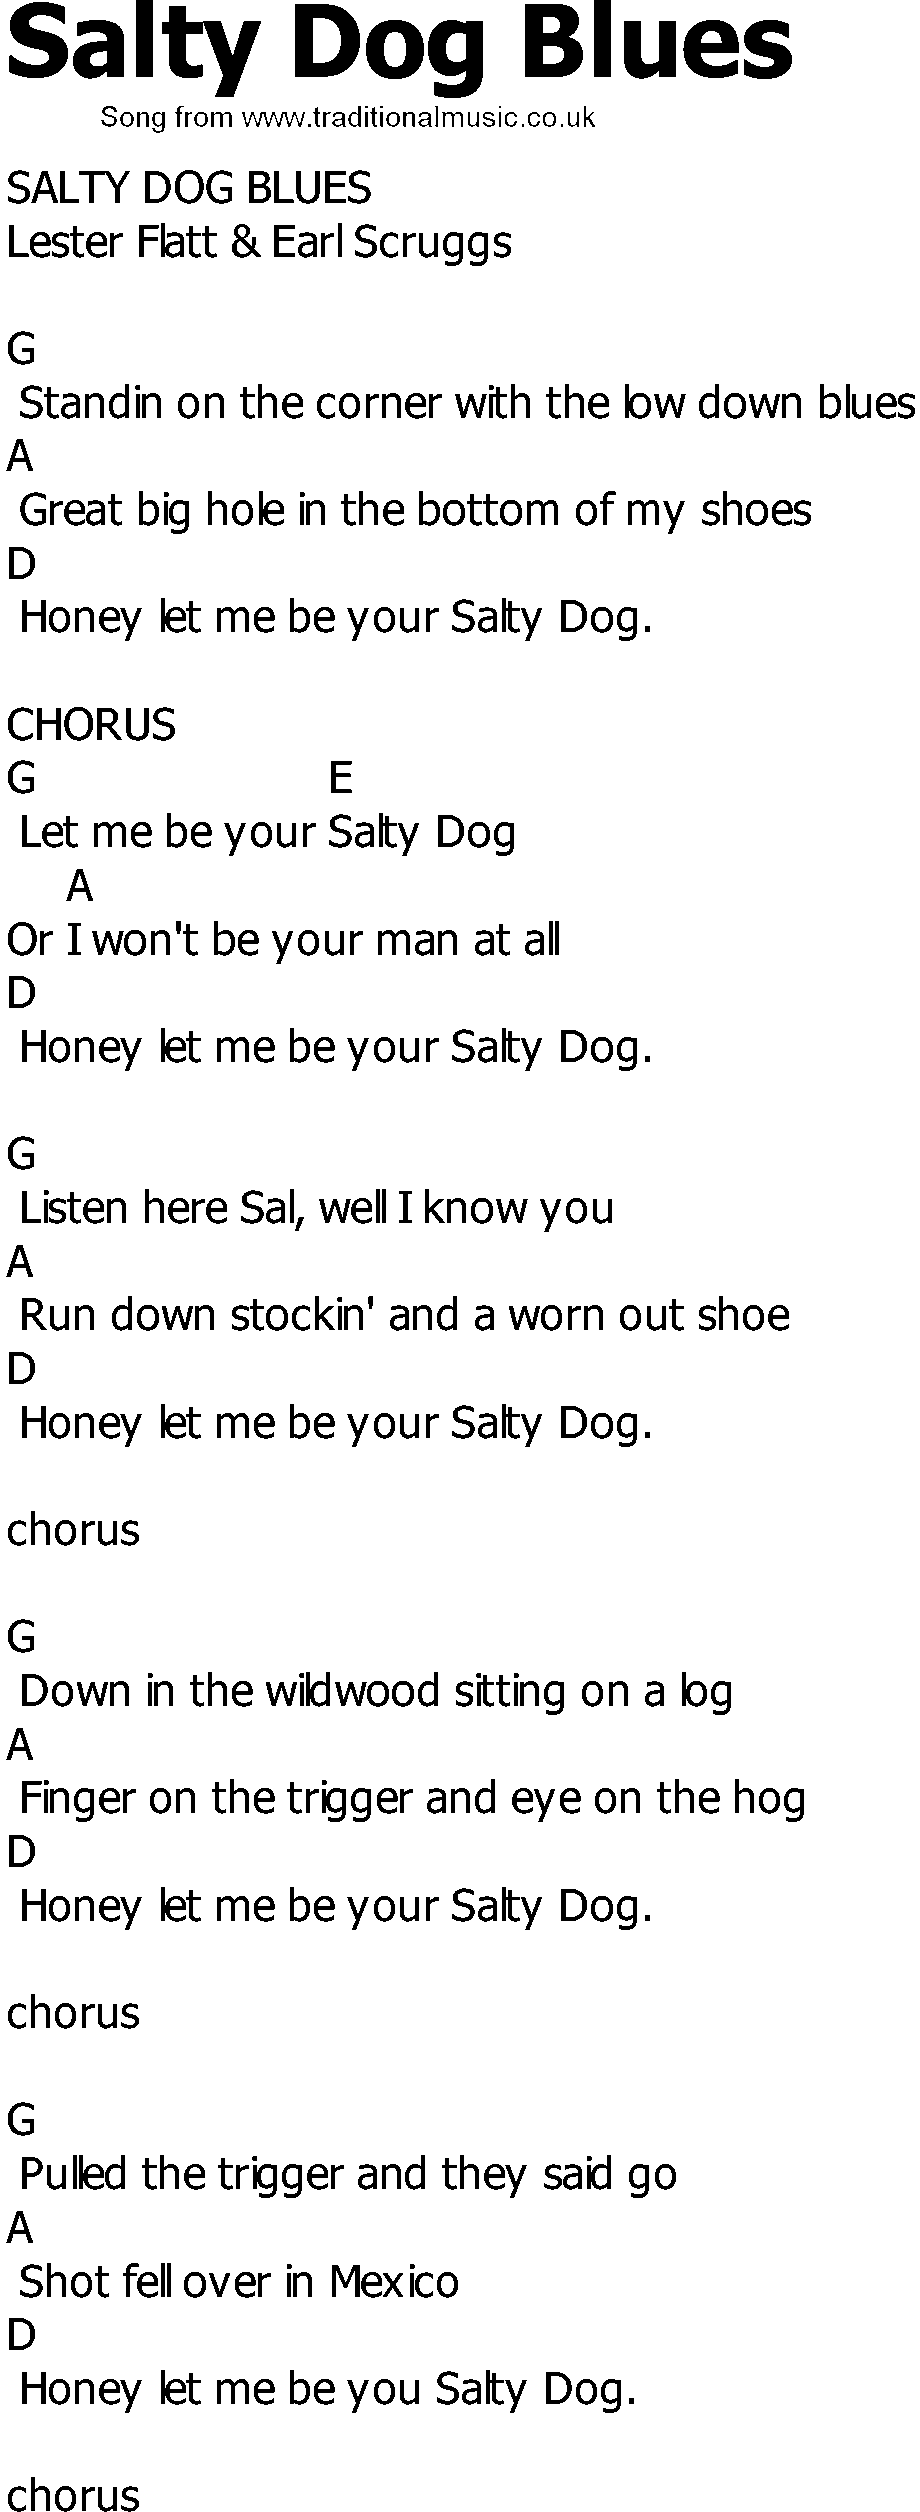 Old Country song lyrics with chords - Salty Dog Blues